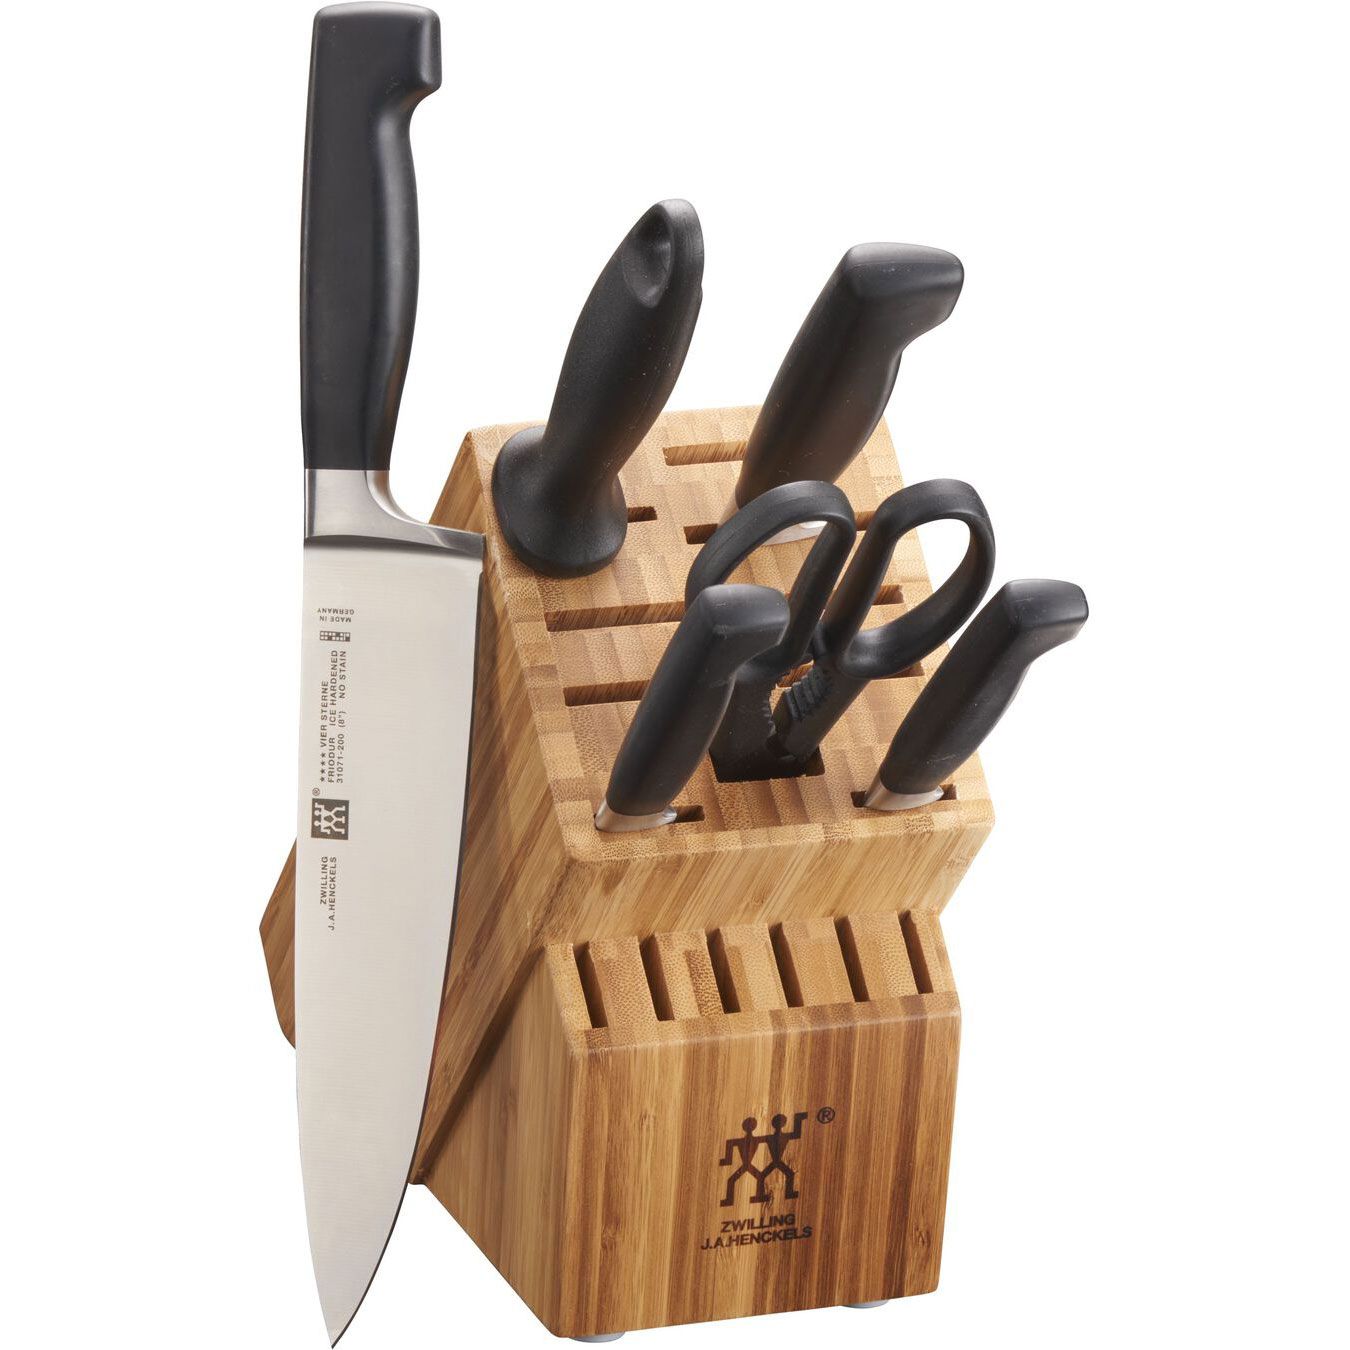 Four Star Knife Block Self-sharpening, 7 Pieces - Zwilling